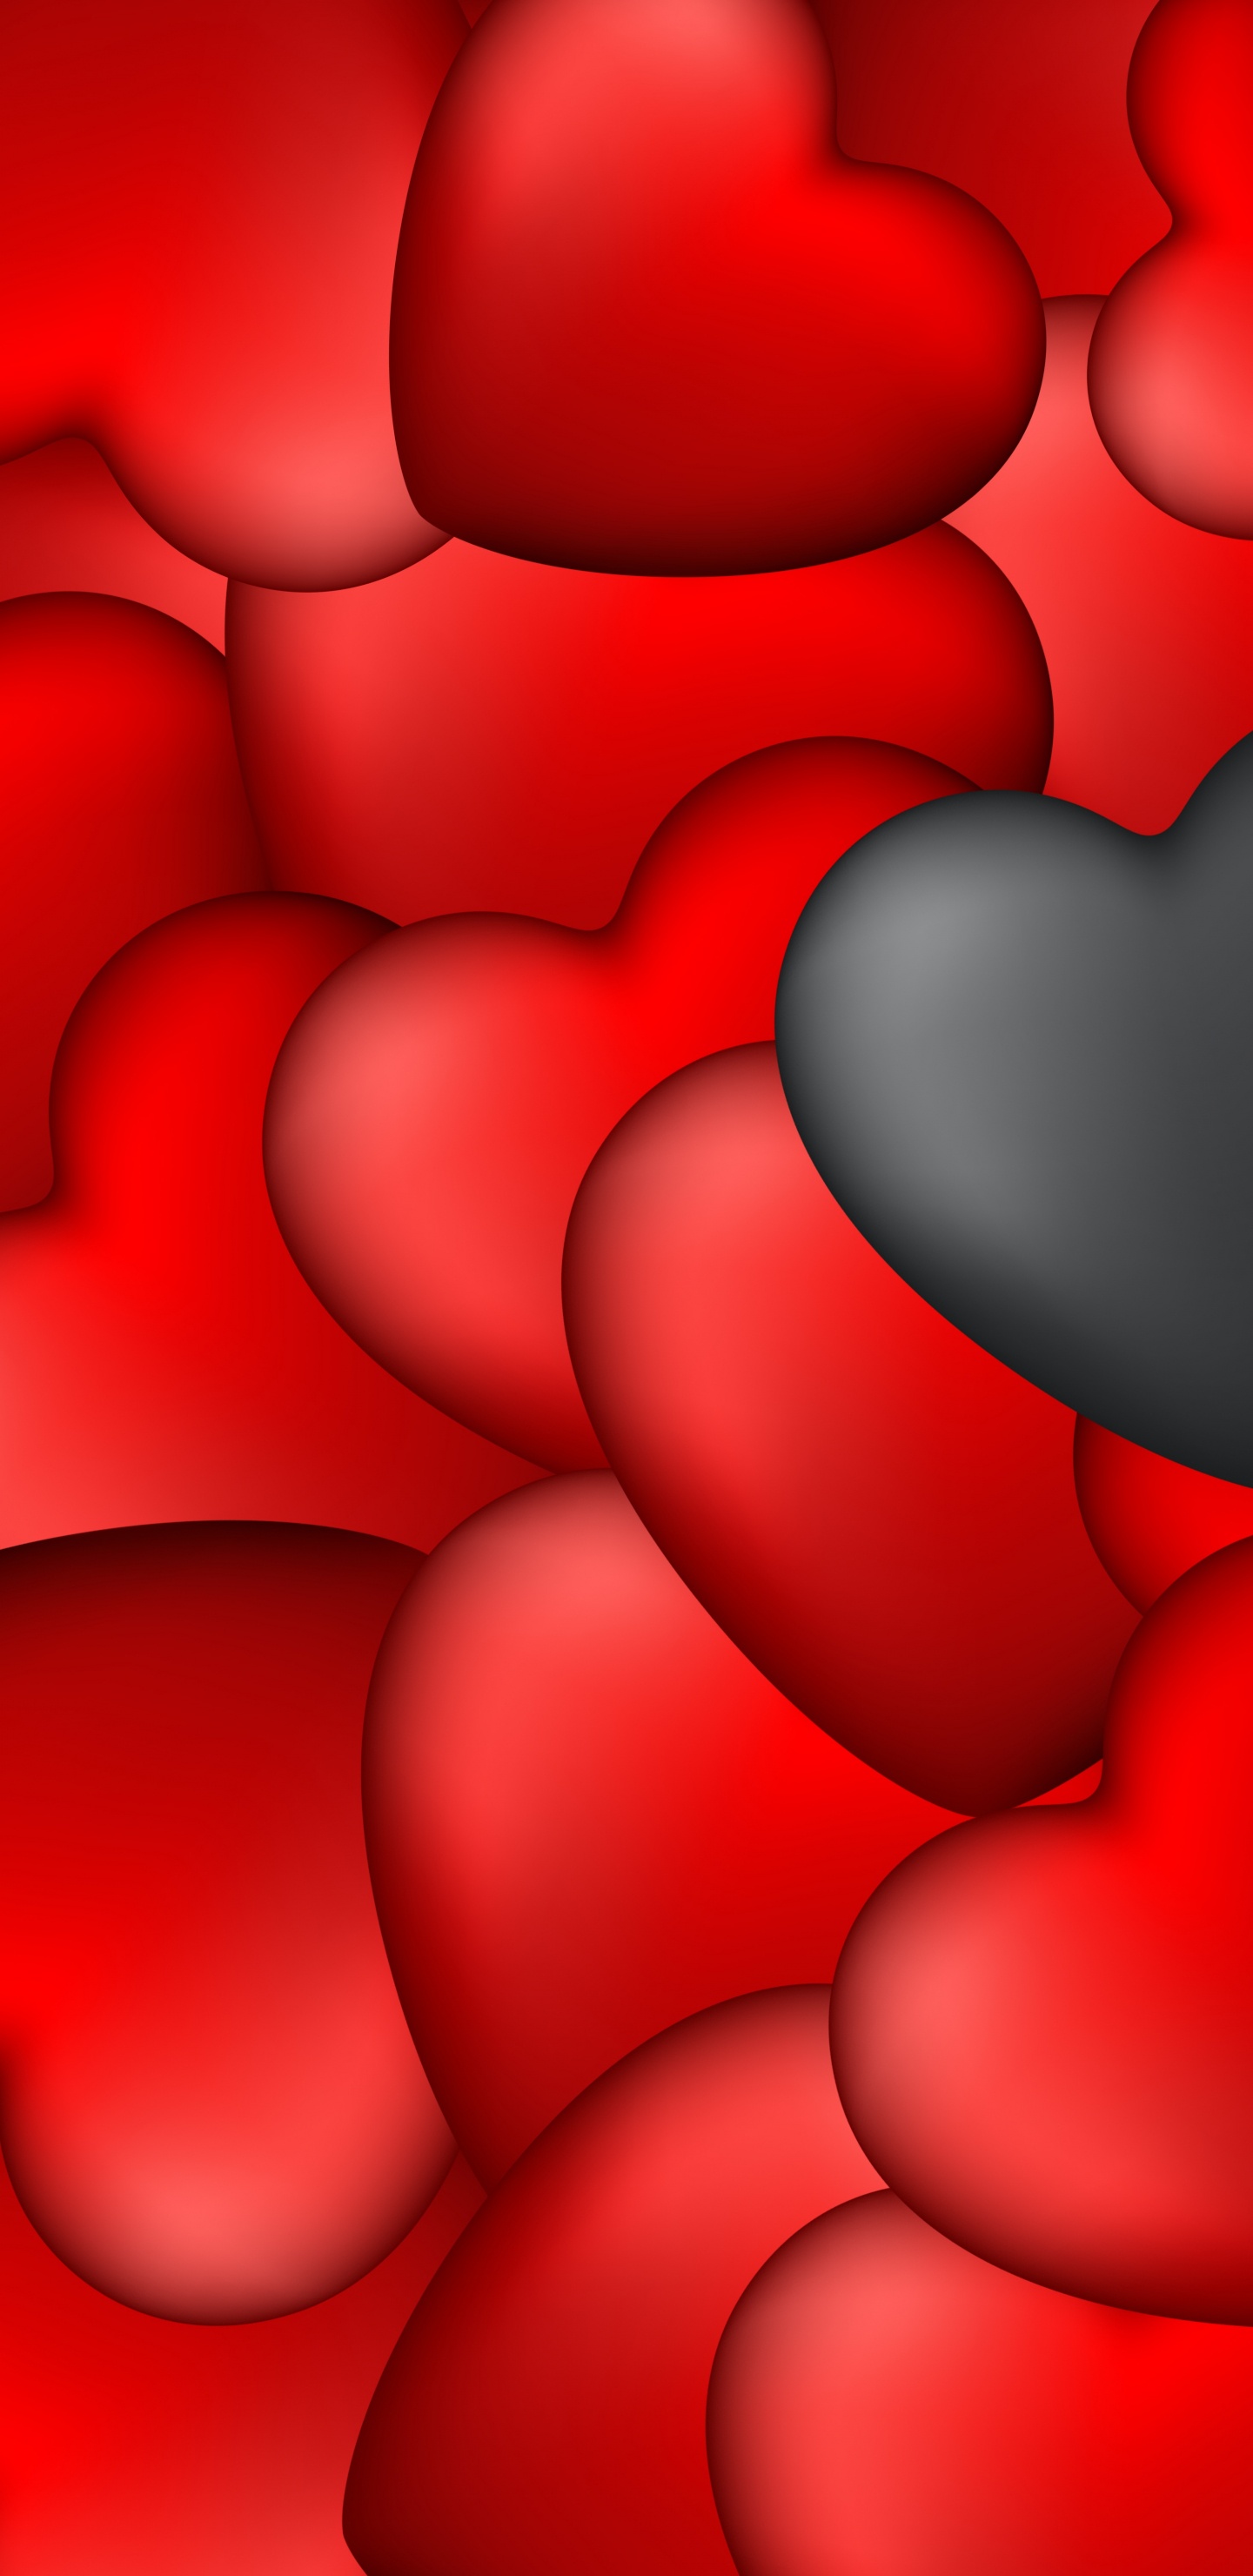 Heart, Black, Red, Valentines Day, Petal. Wallpaper in 1440x2960 Resolution